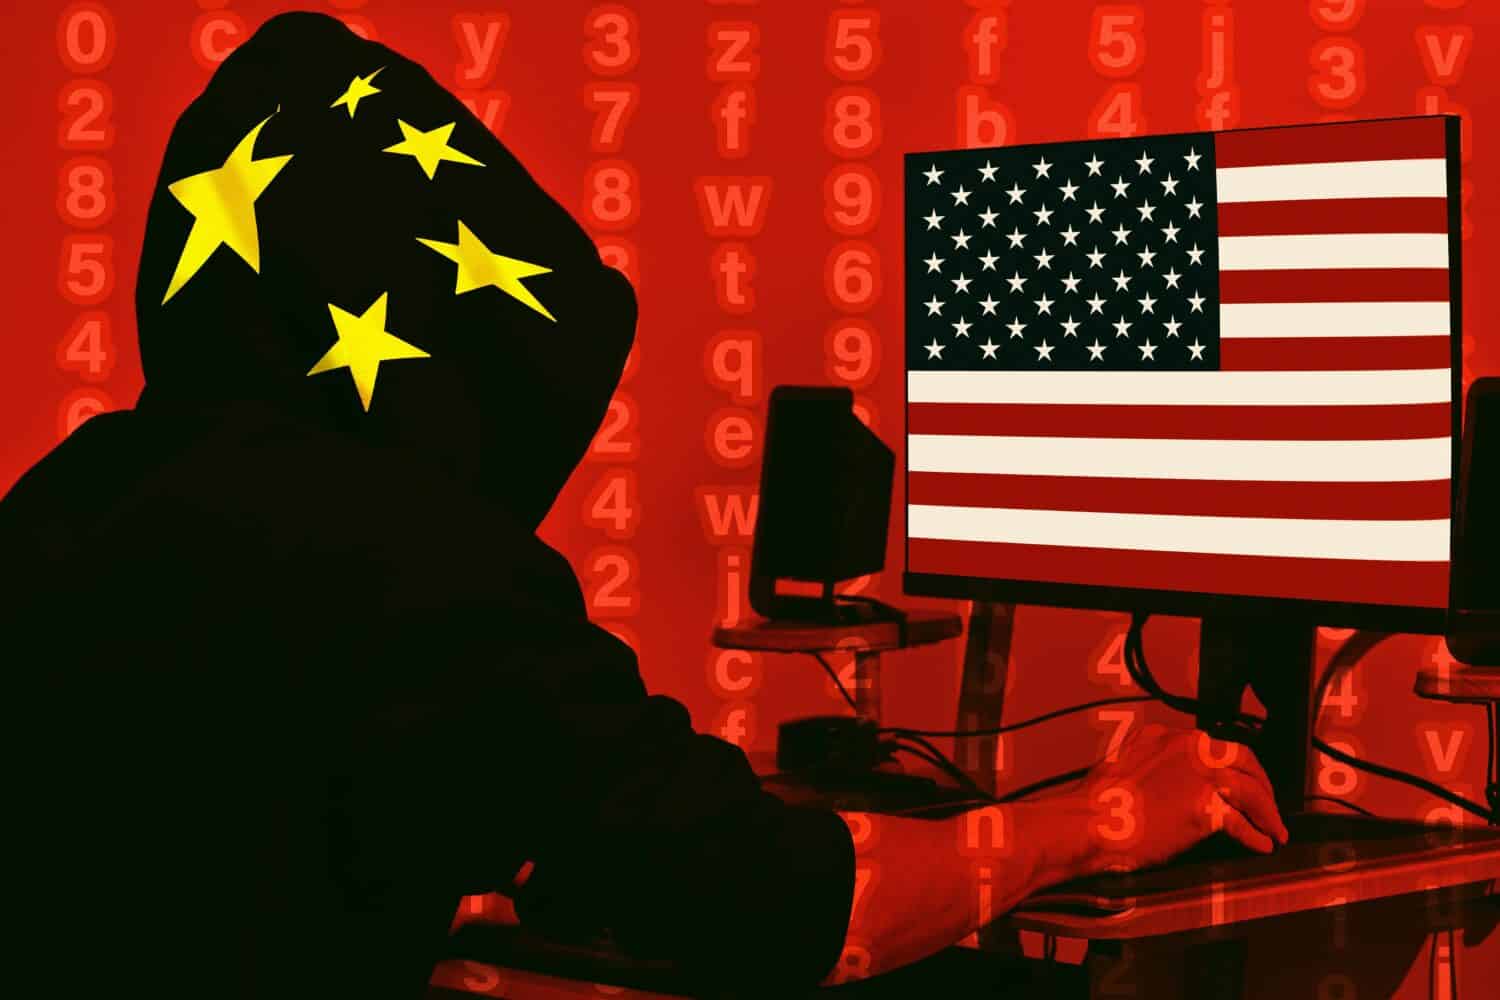 Chinese hacker attacks America. China vs USA. East versus West. Information war of two nations.